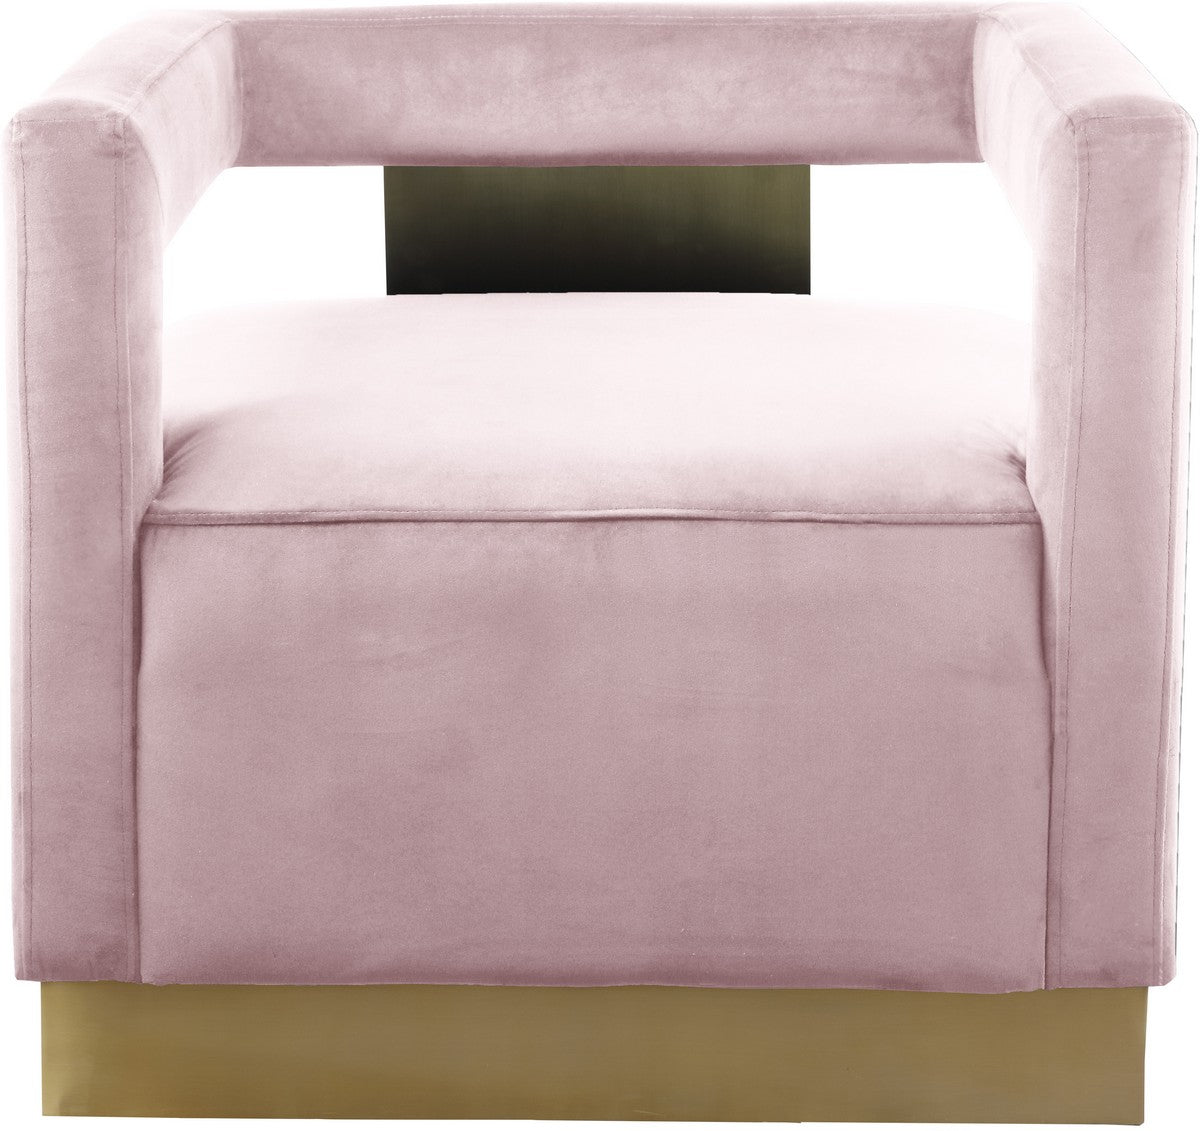 Meridian Furniture Armani Pink Velvet Accent Chair